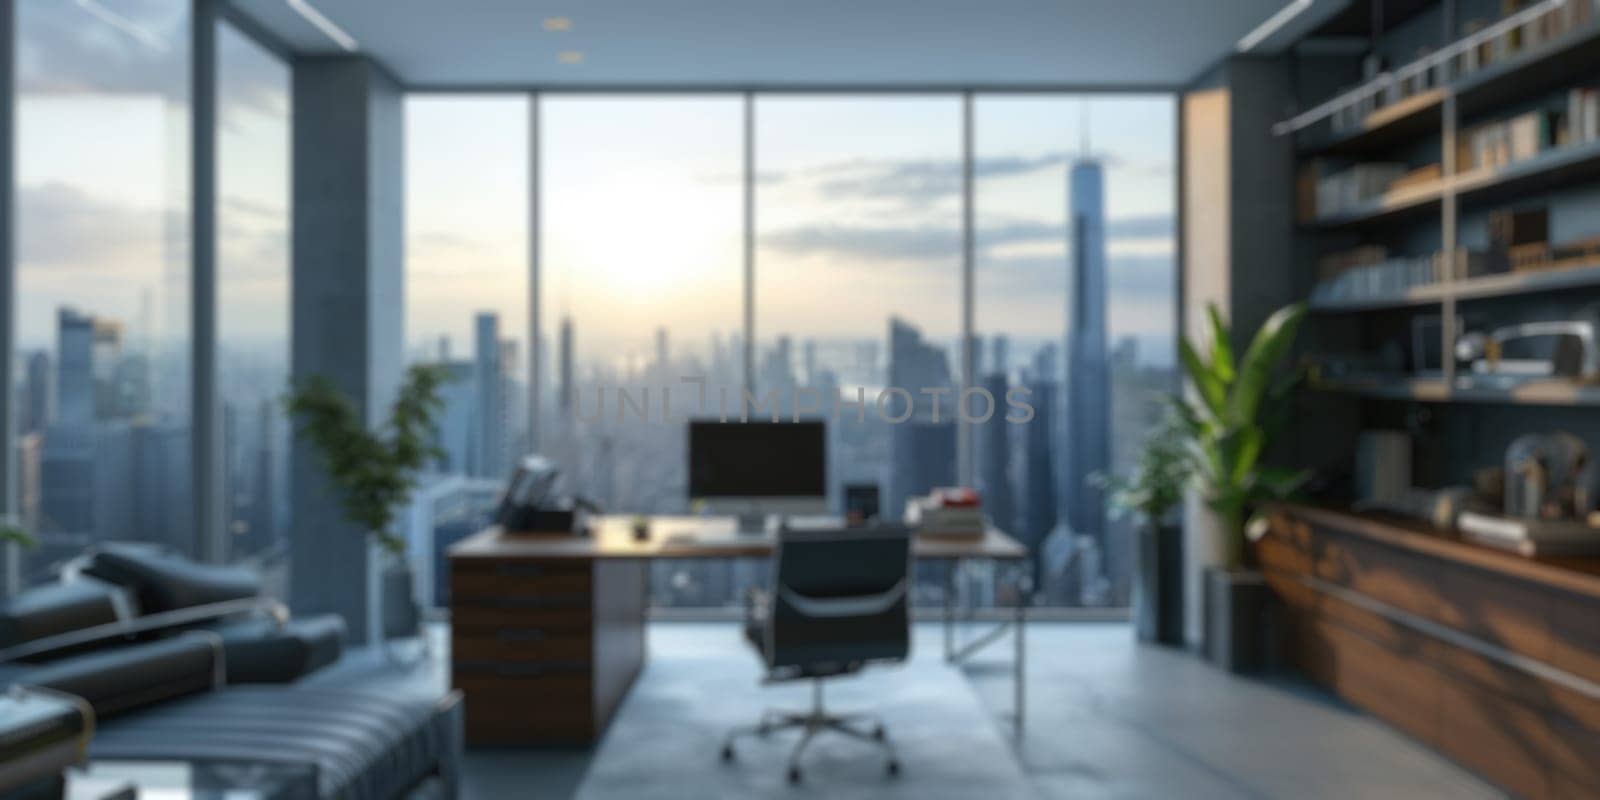 Blurred Office with City View at Dusk. Resplendent. by biancoblue